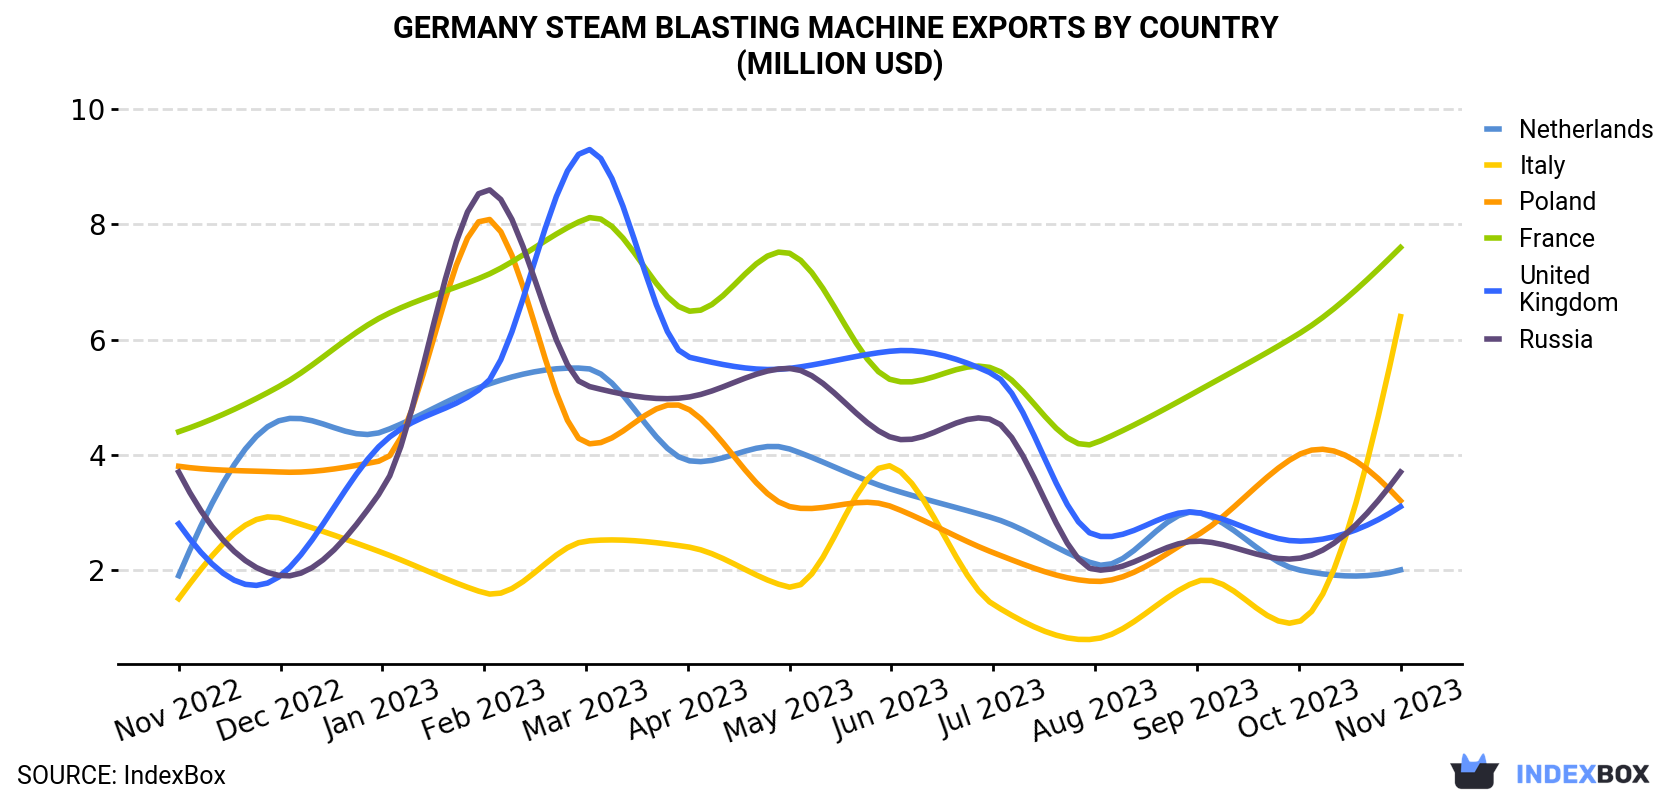 Germany Steam Blasting Machine Exports By Country (Million USD)